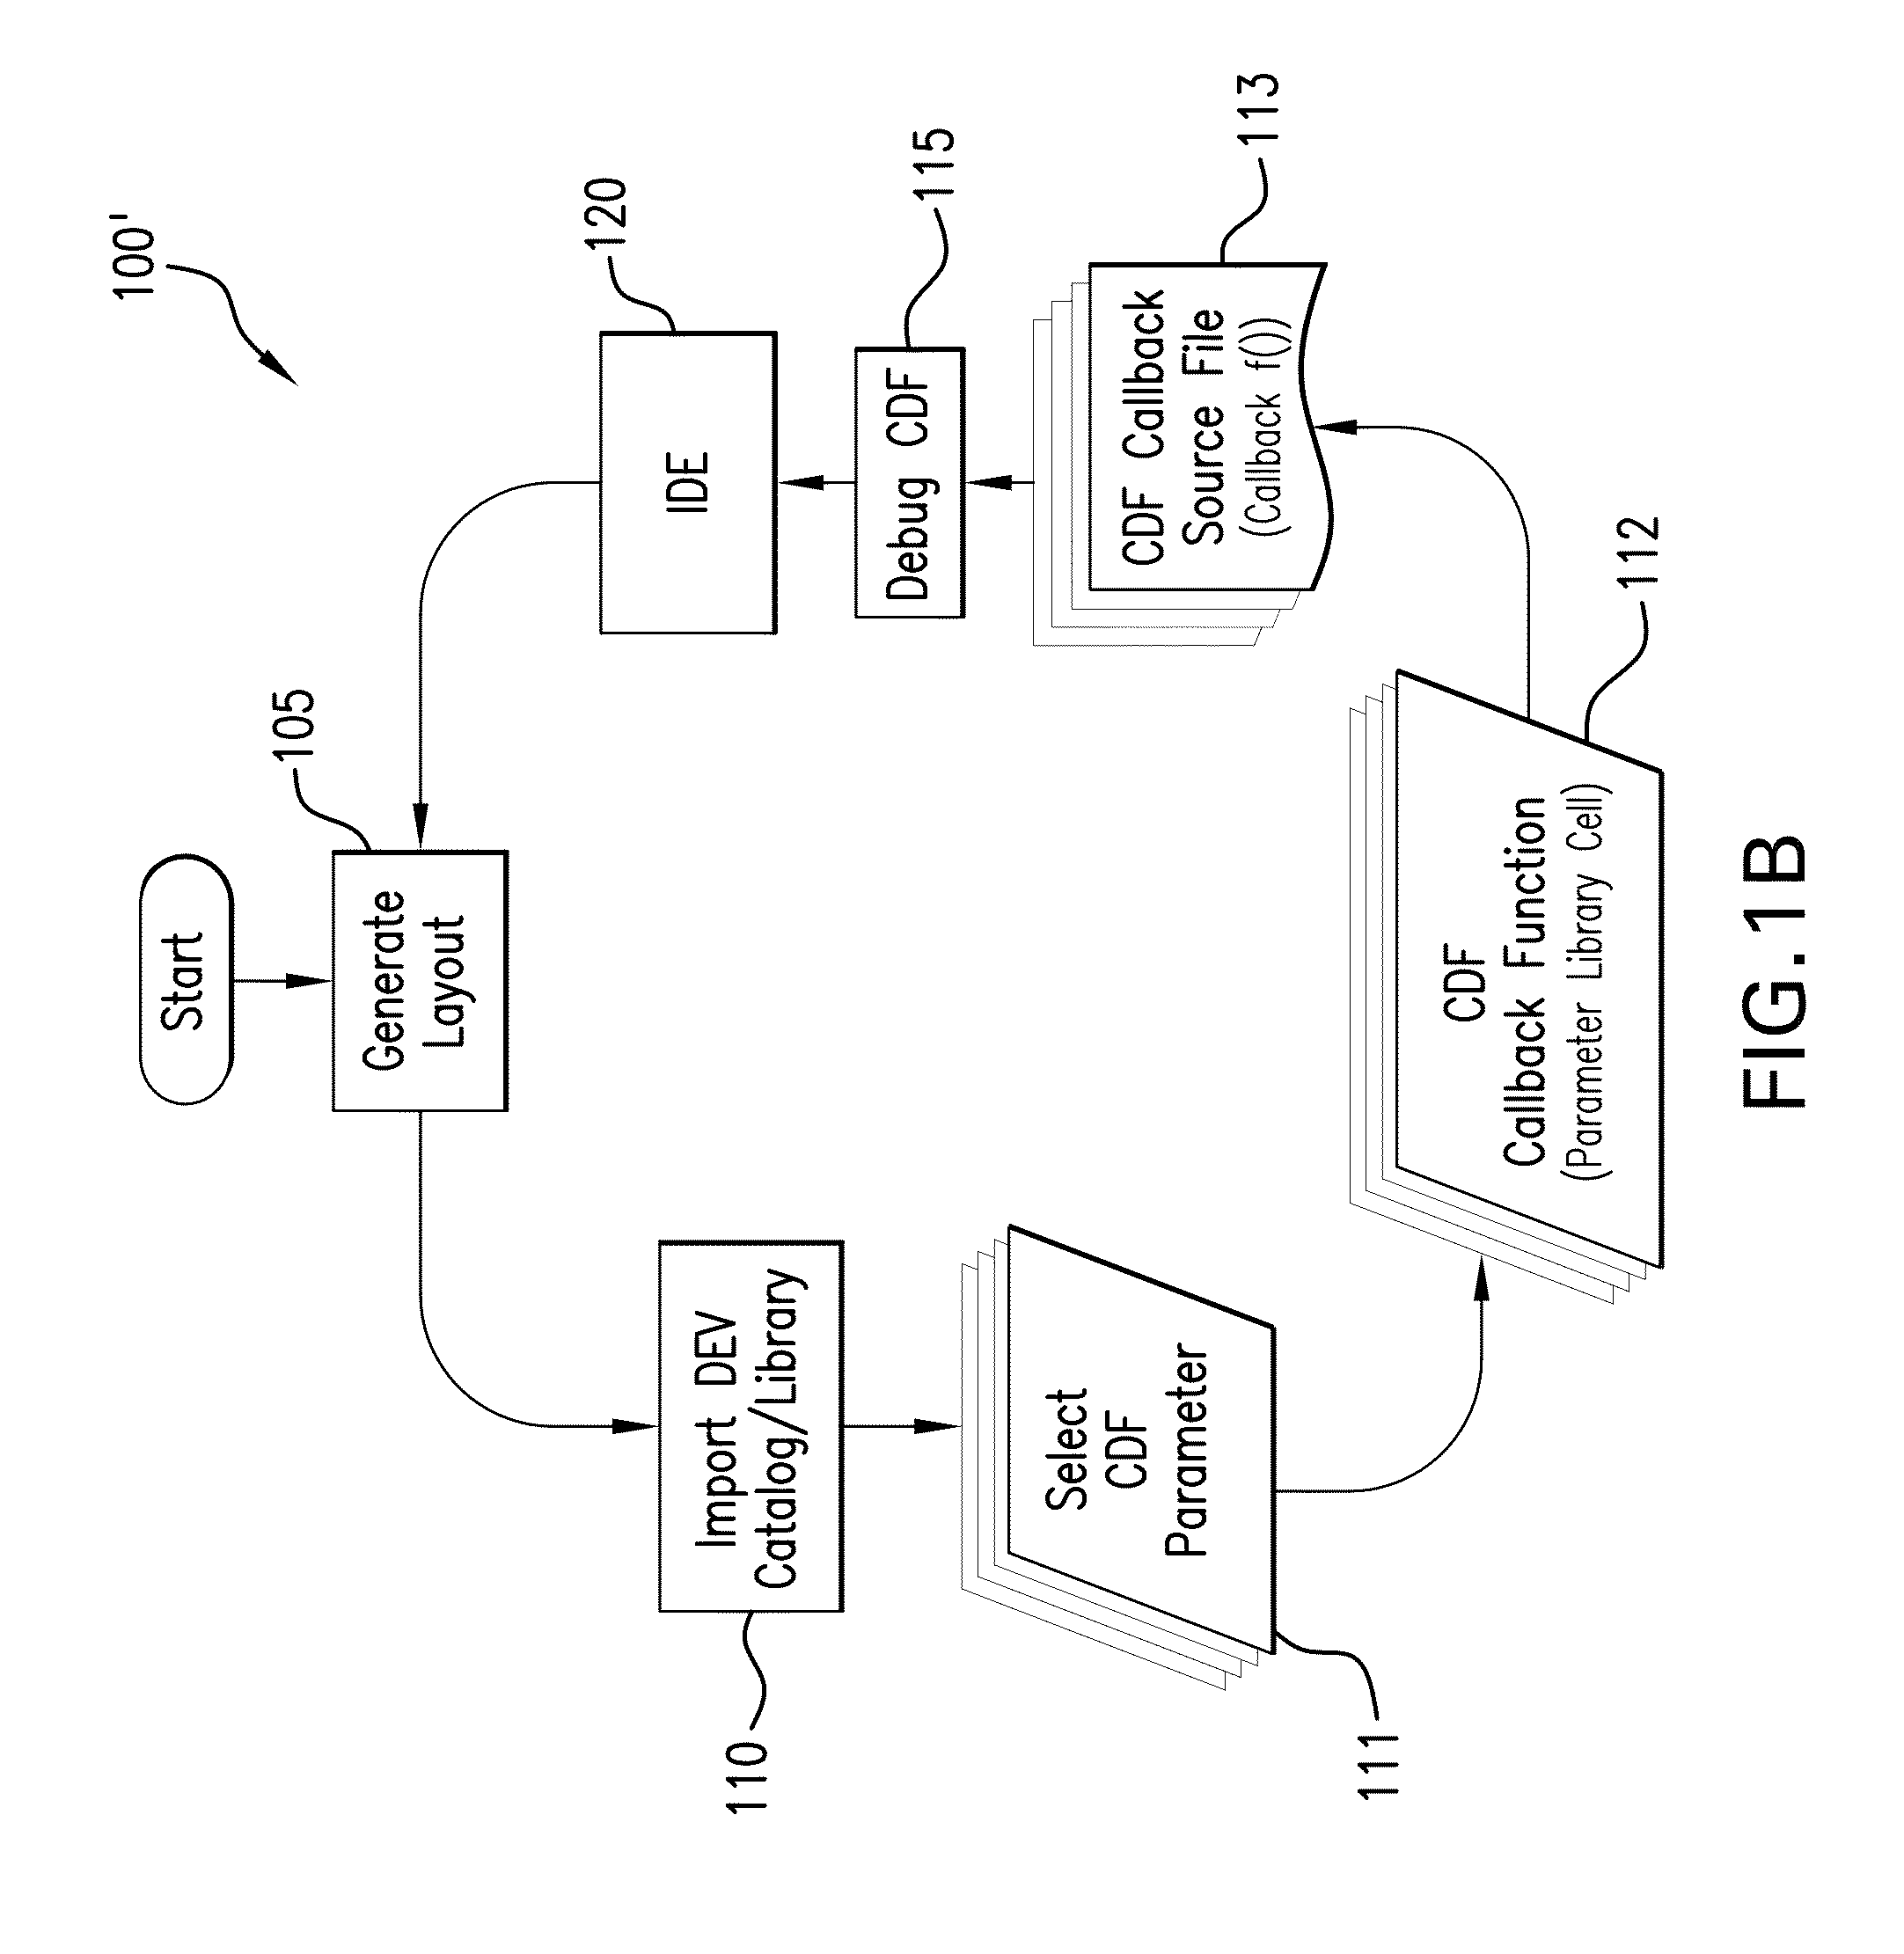 Method and system for automatically establishing a component description format (CDF) debugging environment